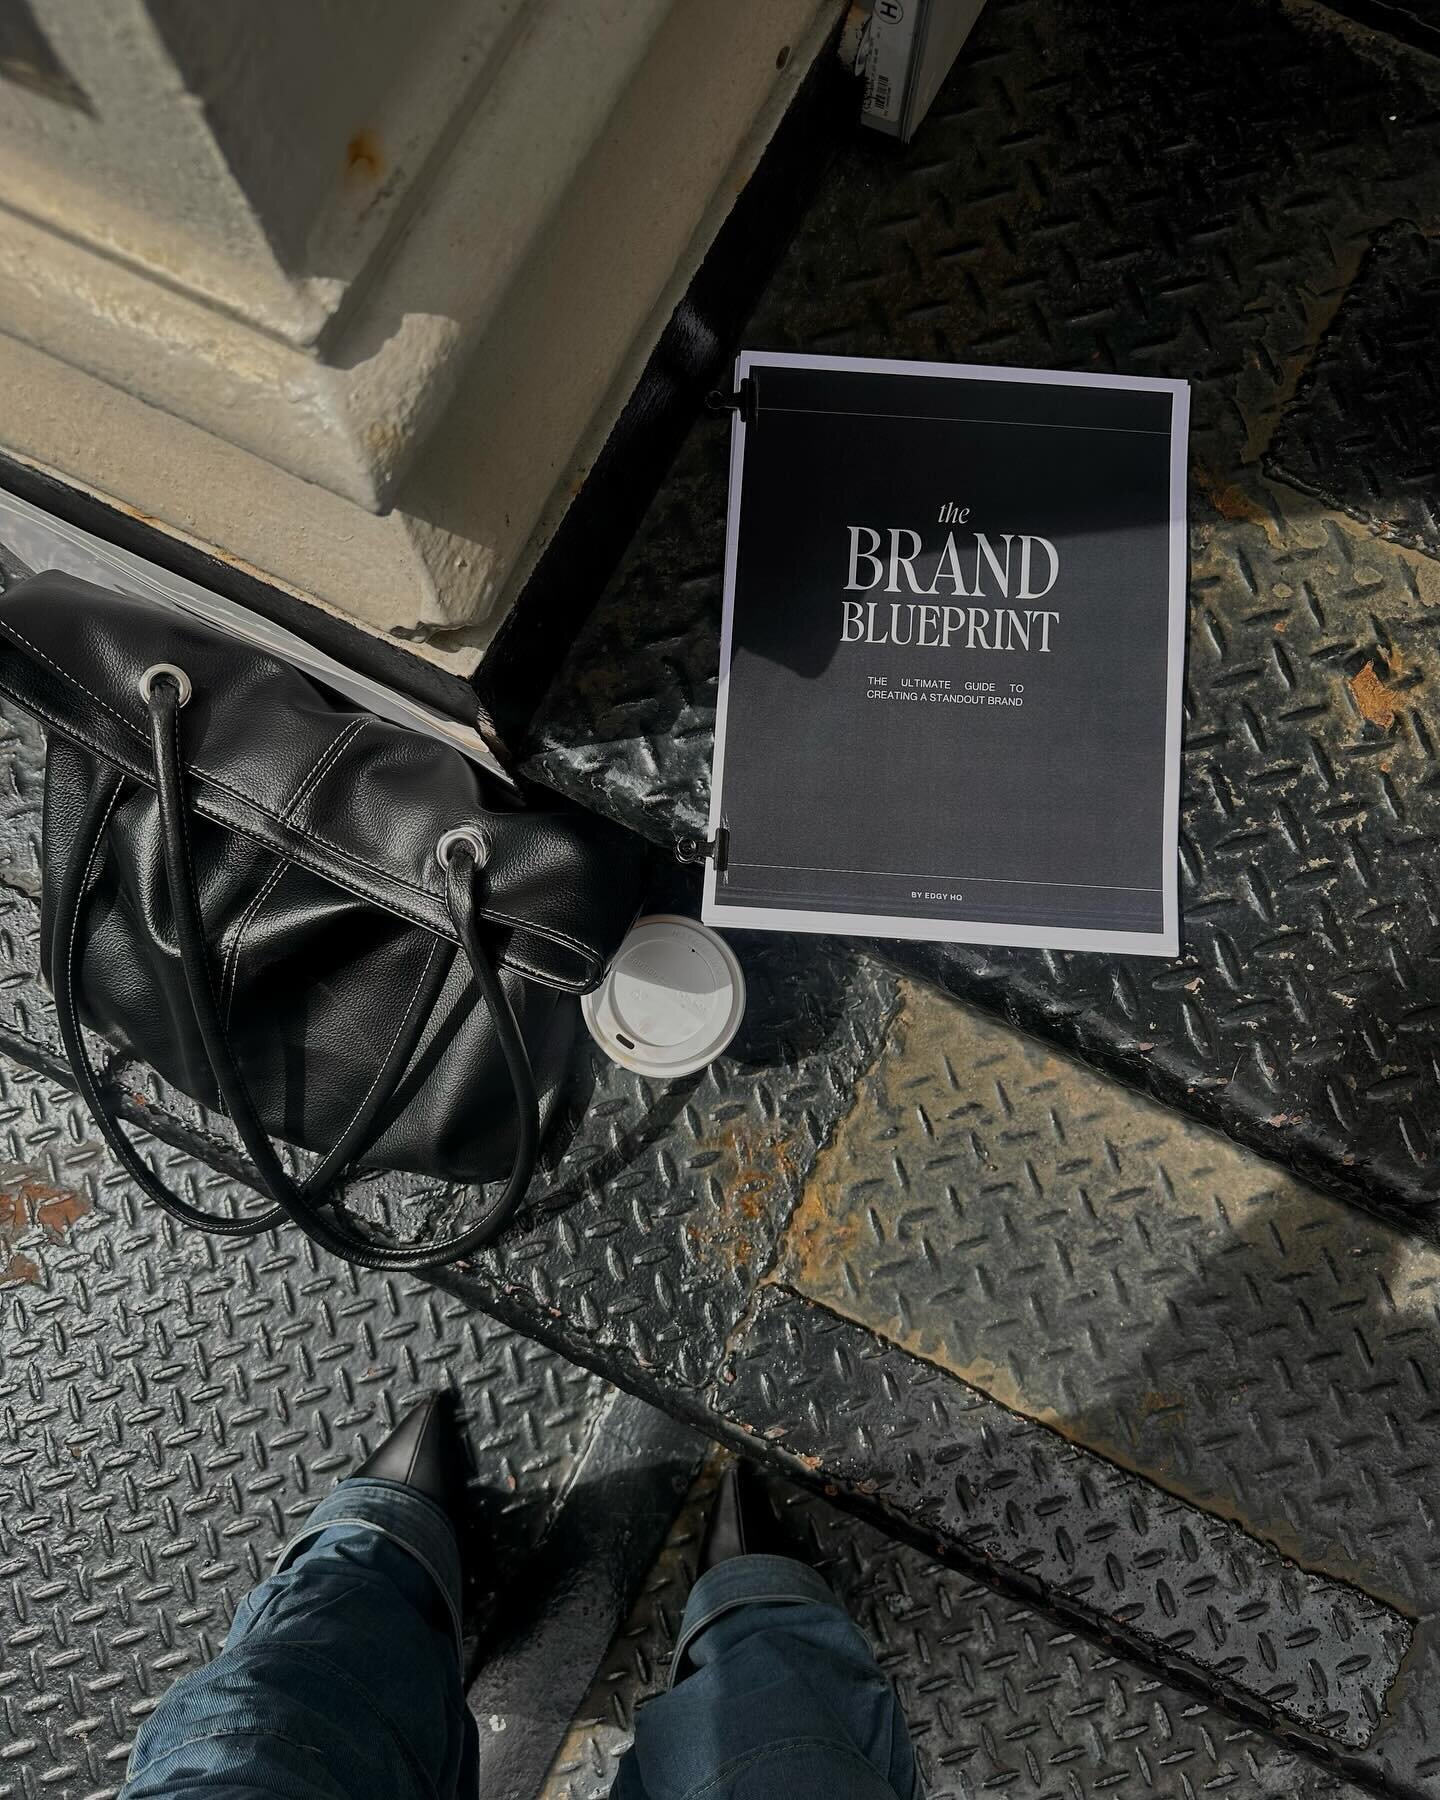 &ldquo;the perfect brand guide doesn&rsquo;t exist-&hellip;.&rdquo; 🤭

entrepreneurs, are you ready for your breakthrough? 

THE BRAND BLUEPRINT is the key to unlocking your own standout brand 🔐 a step-by-step guide so you can stop going around in 